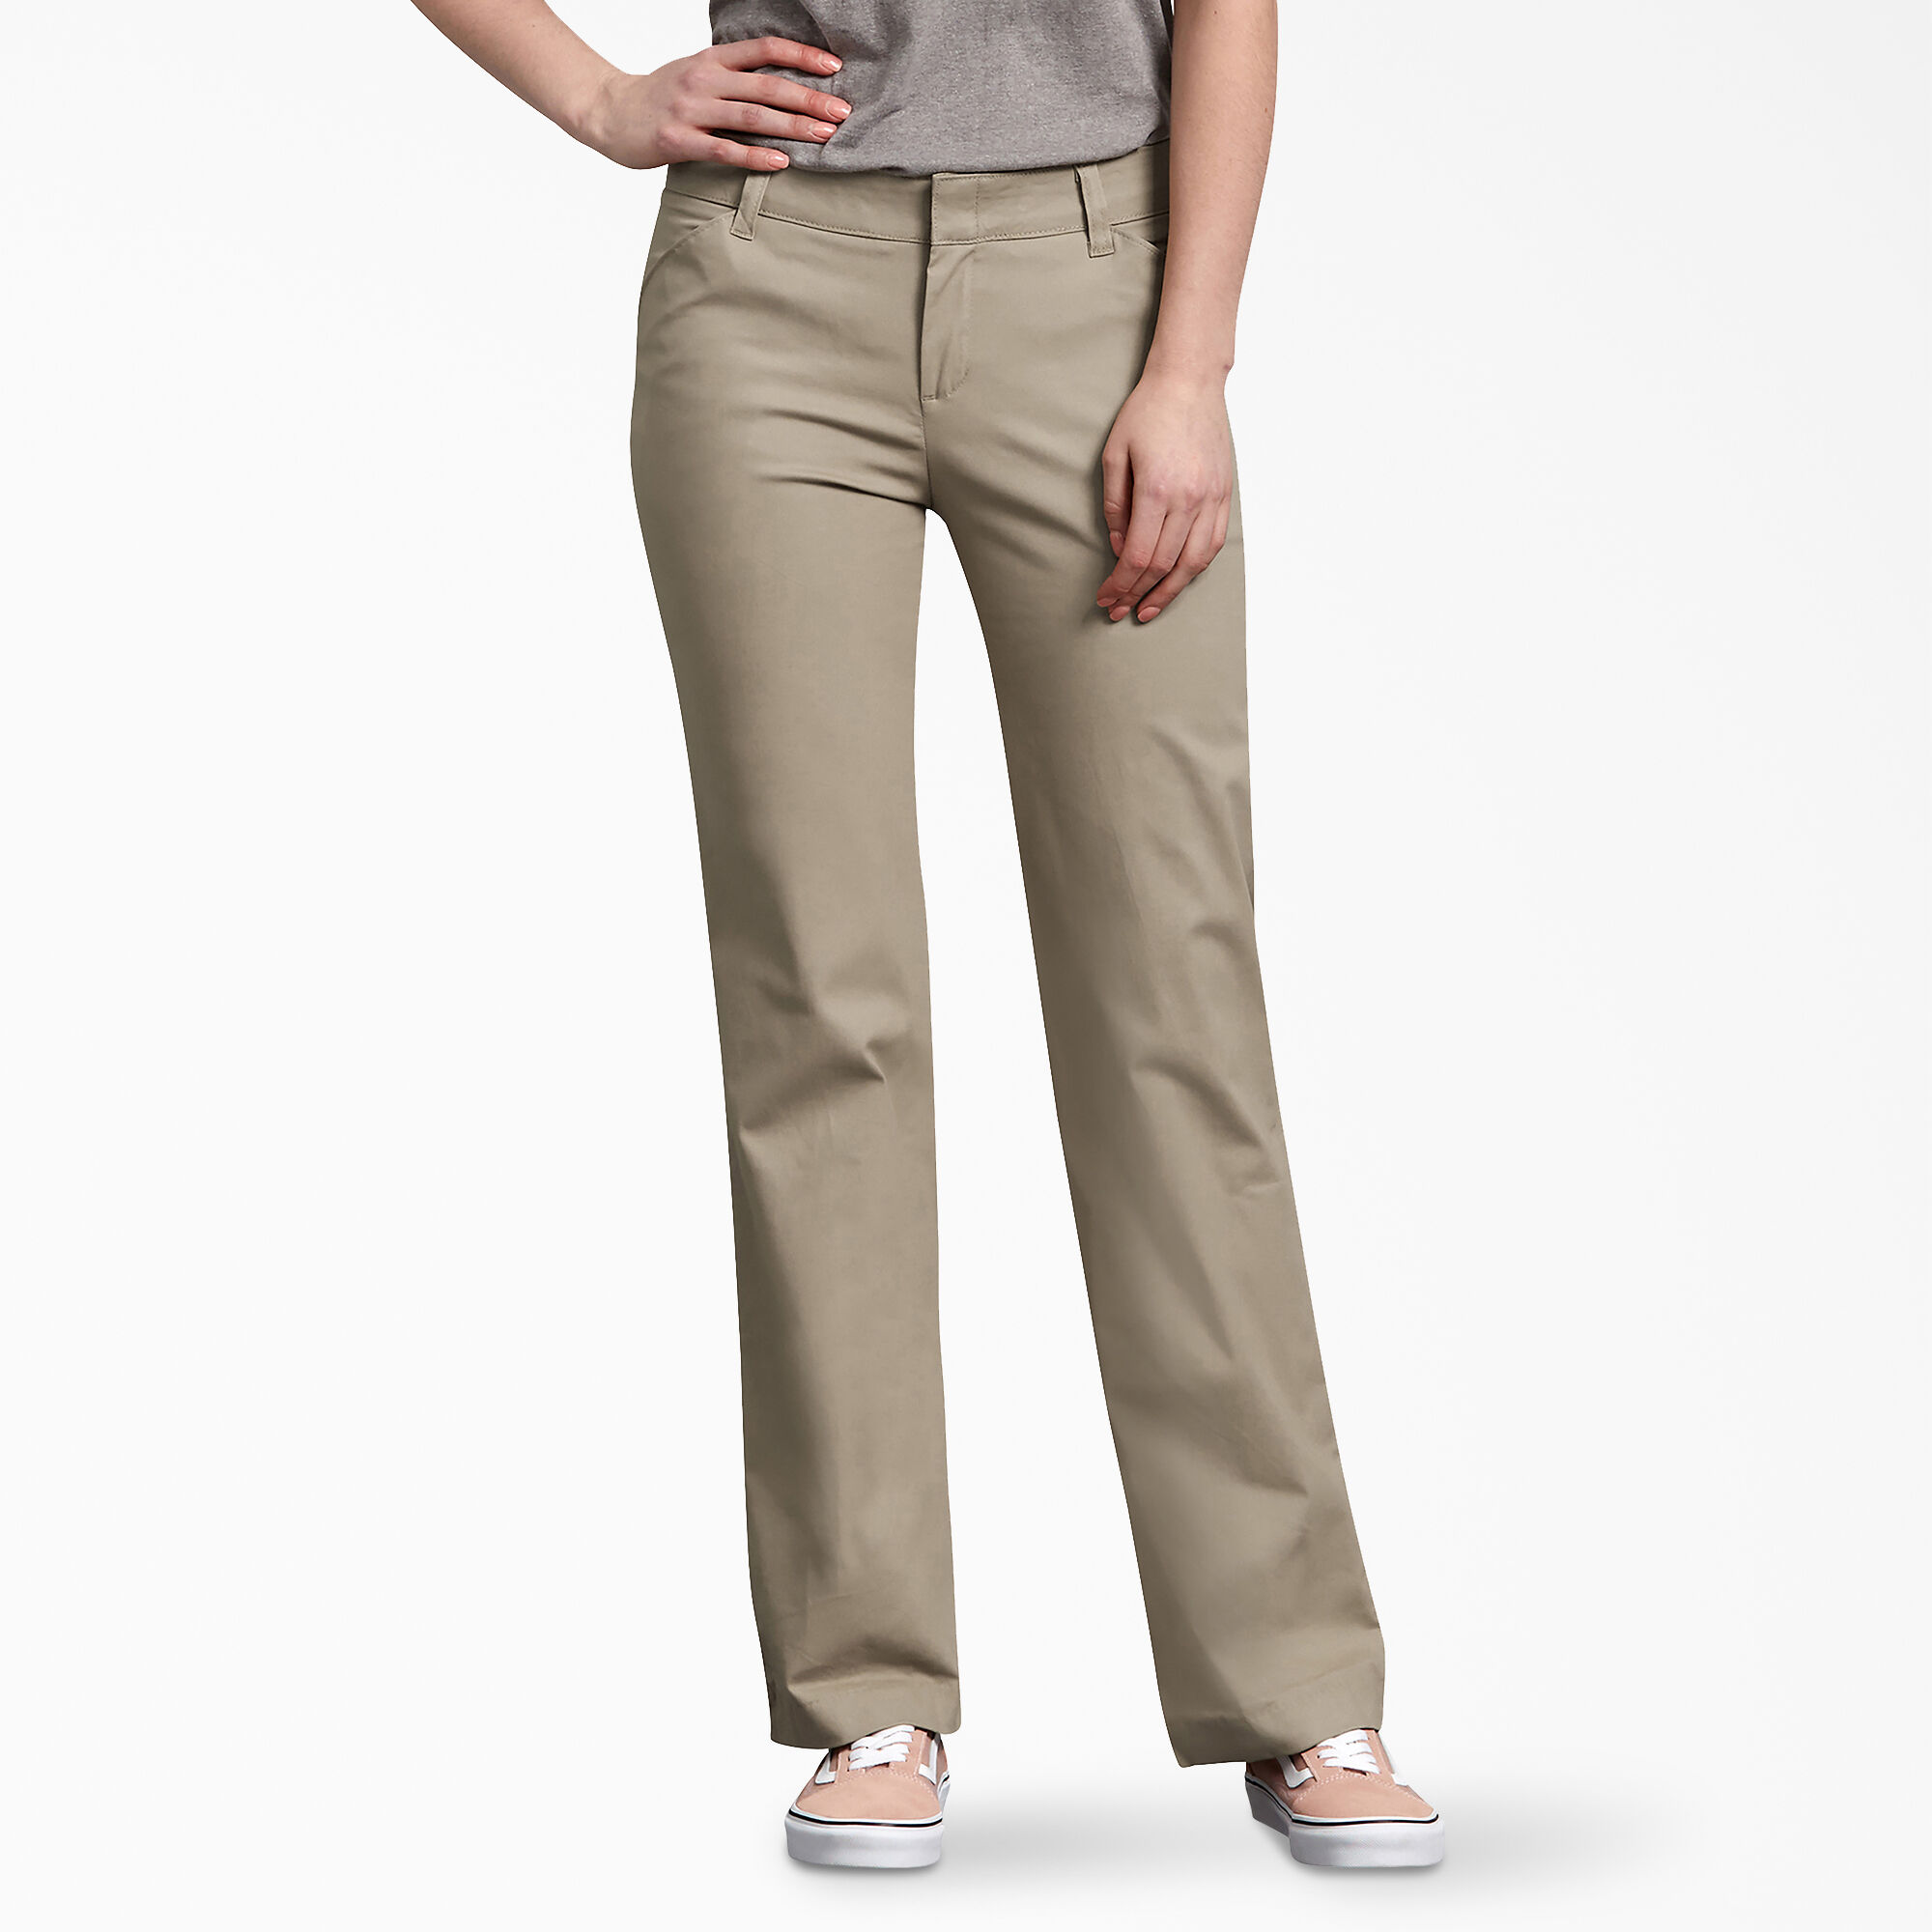 Women's Relaxed Fit Straight Leg 